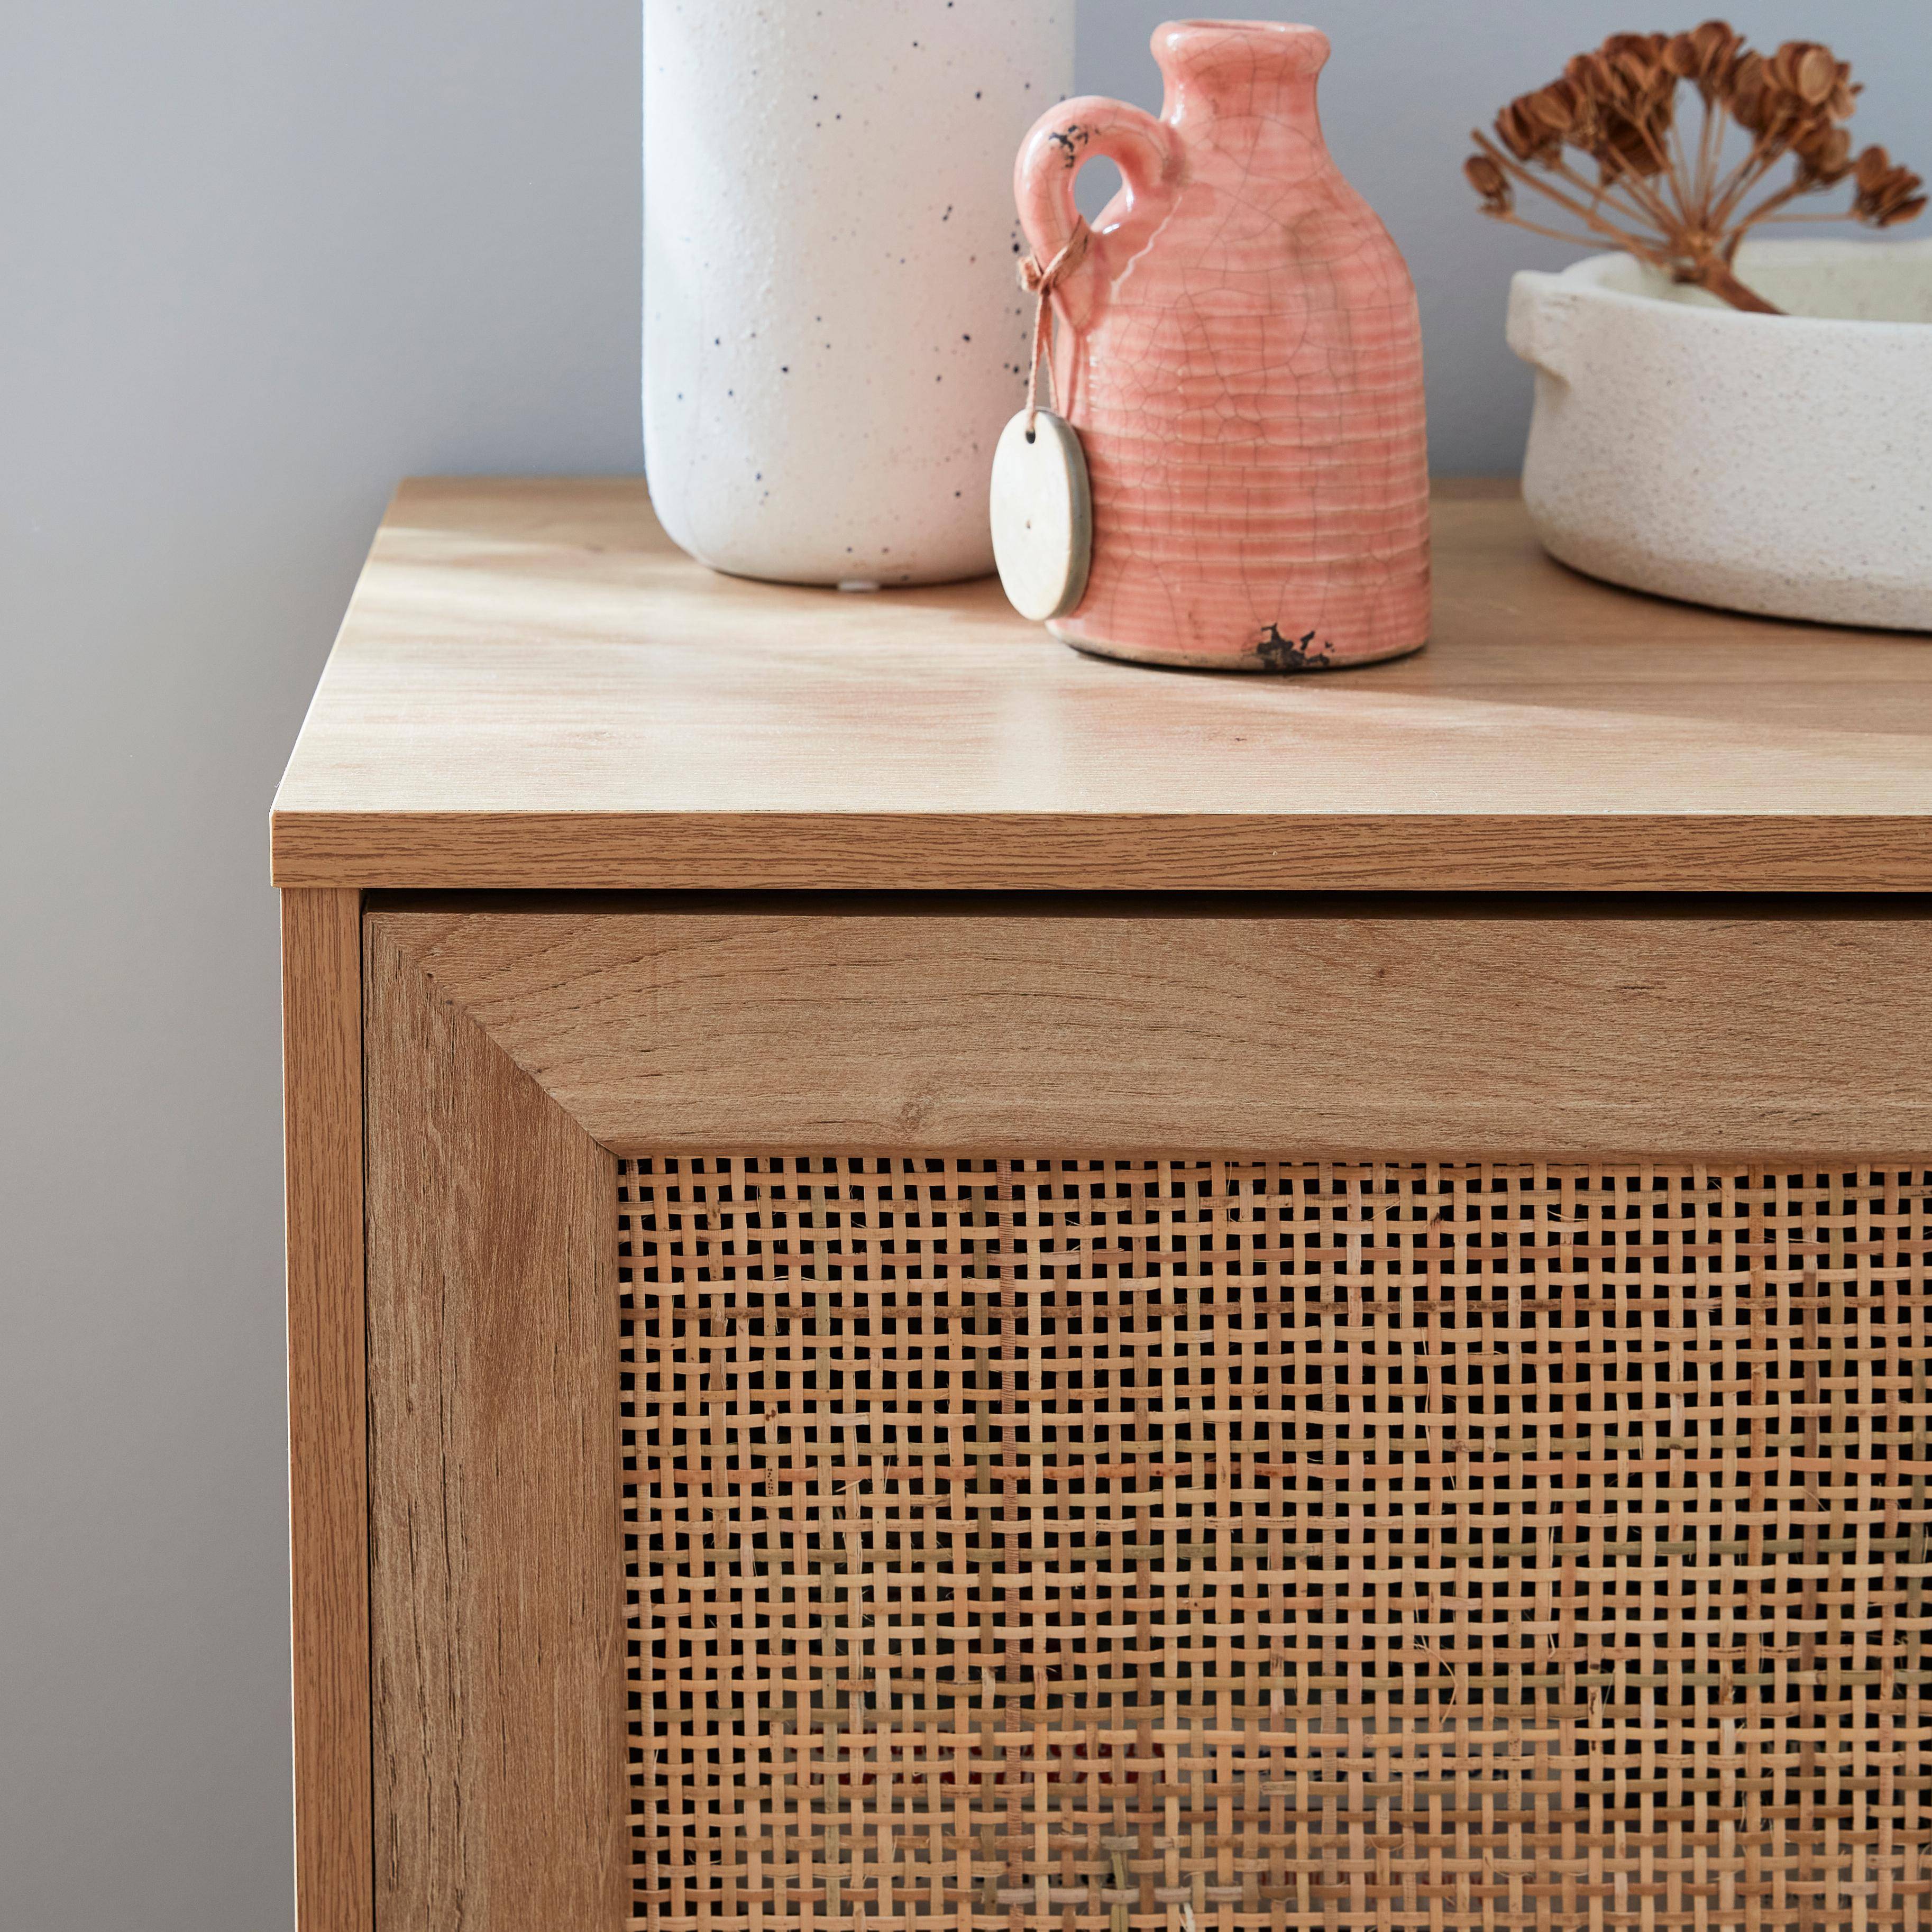 Wooden and cane rattan detail storage cabinet with 2 shelves, 1 cupboard, Scandi-style legs, 80x39x65.8cm - Boheme - Natural wood colour,sweeek,Photo2